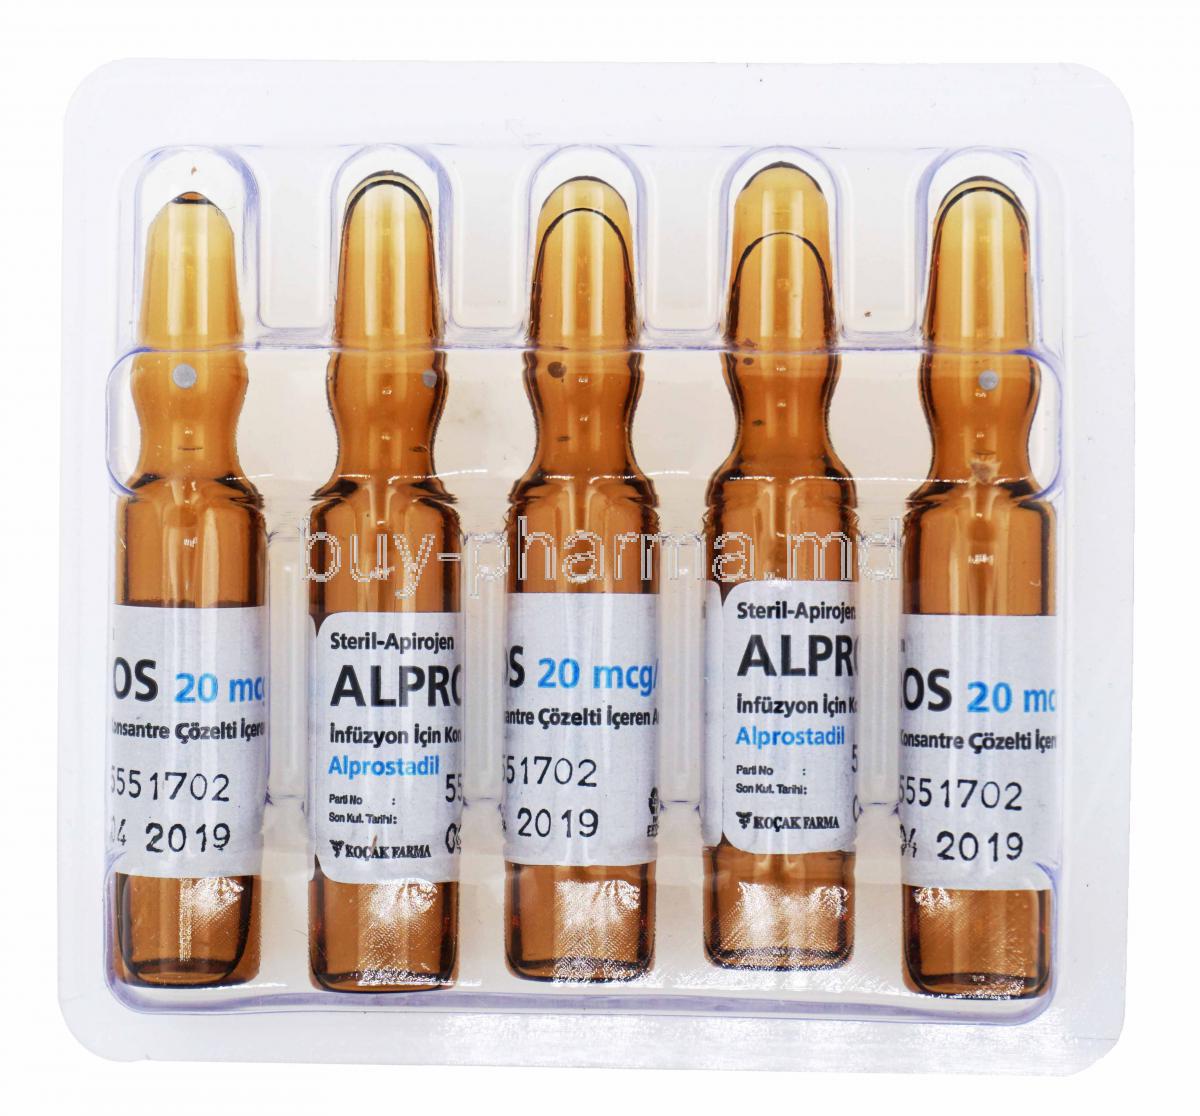 alprostadil injection pictures